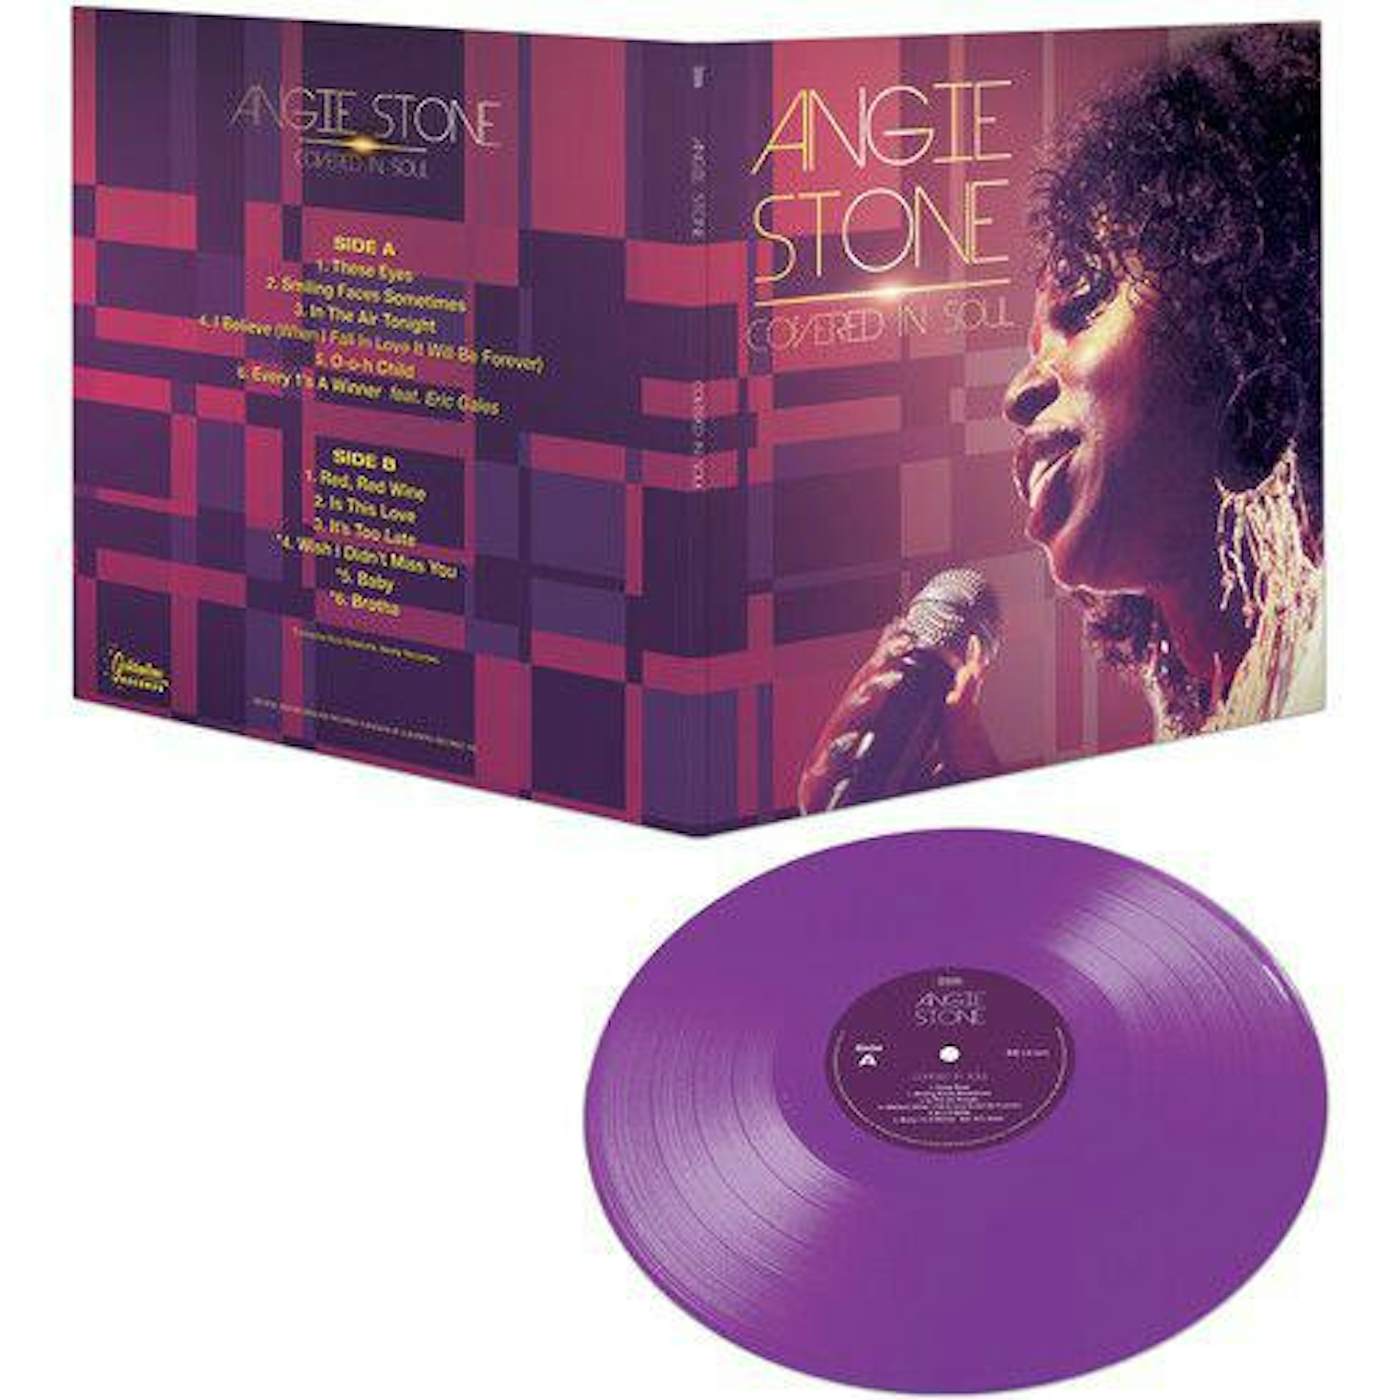 Angie Stone Covered In Soul - Purple Vinyl Record